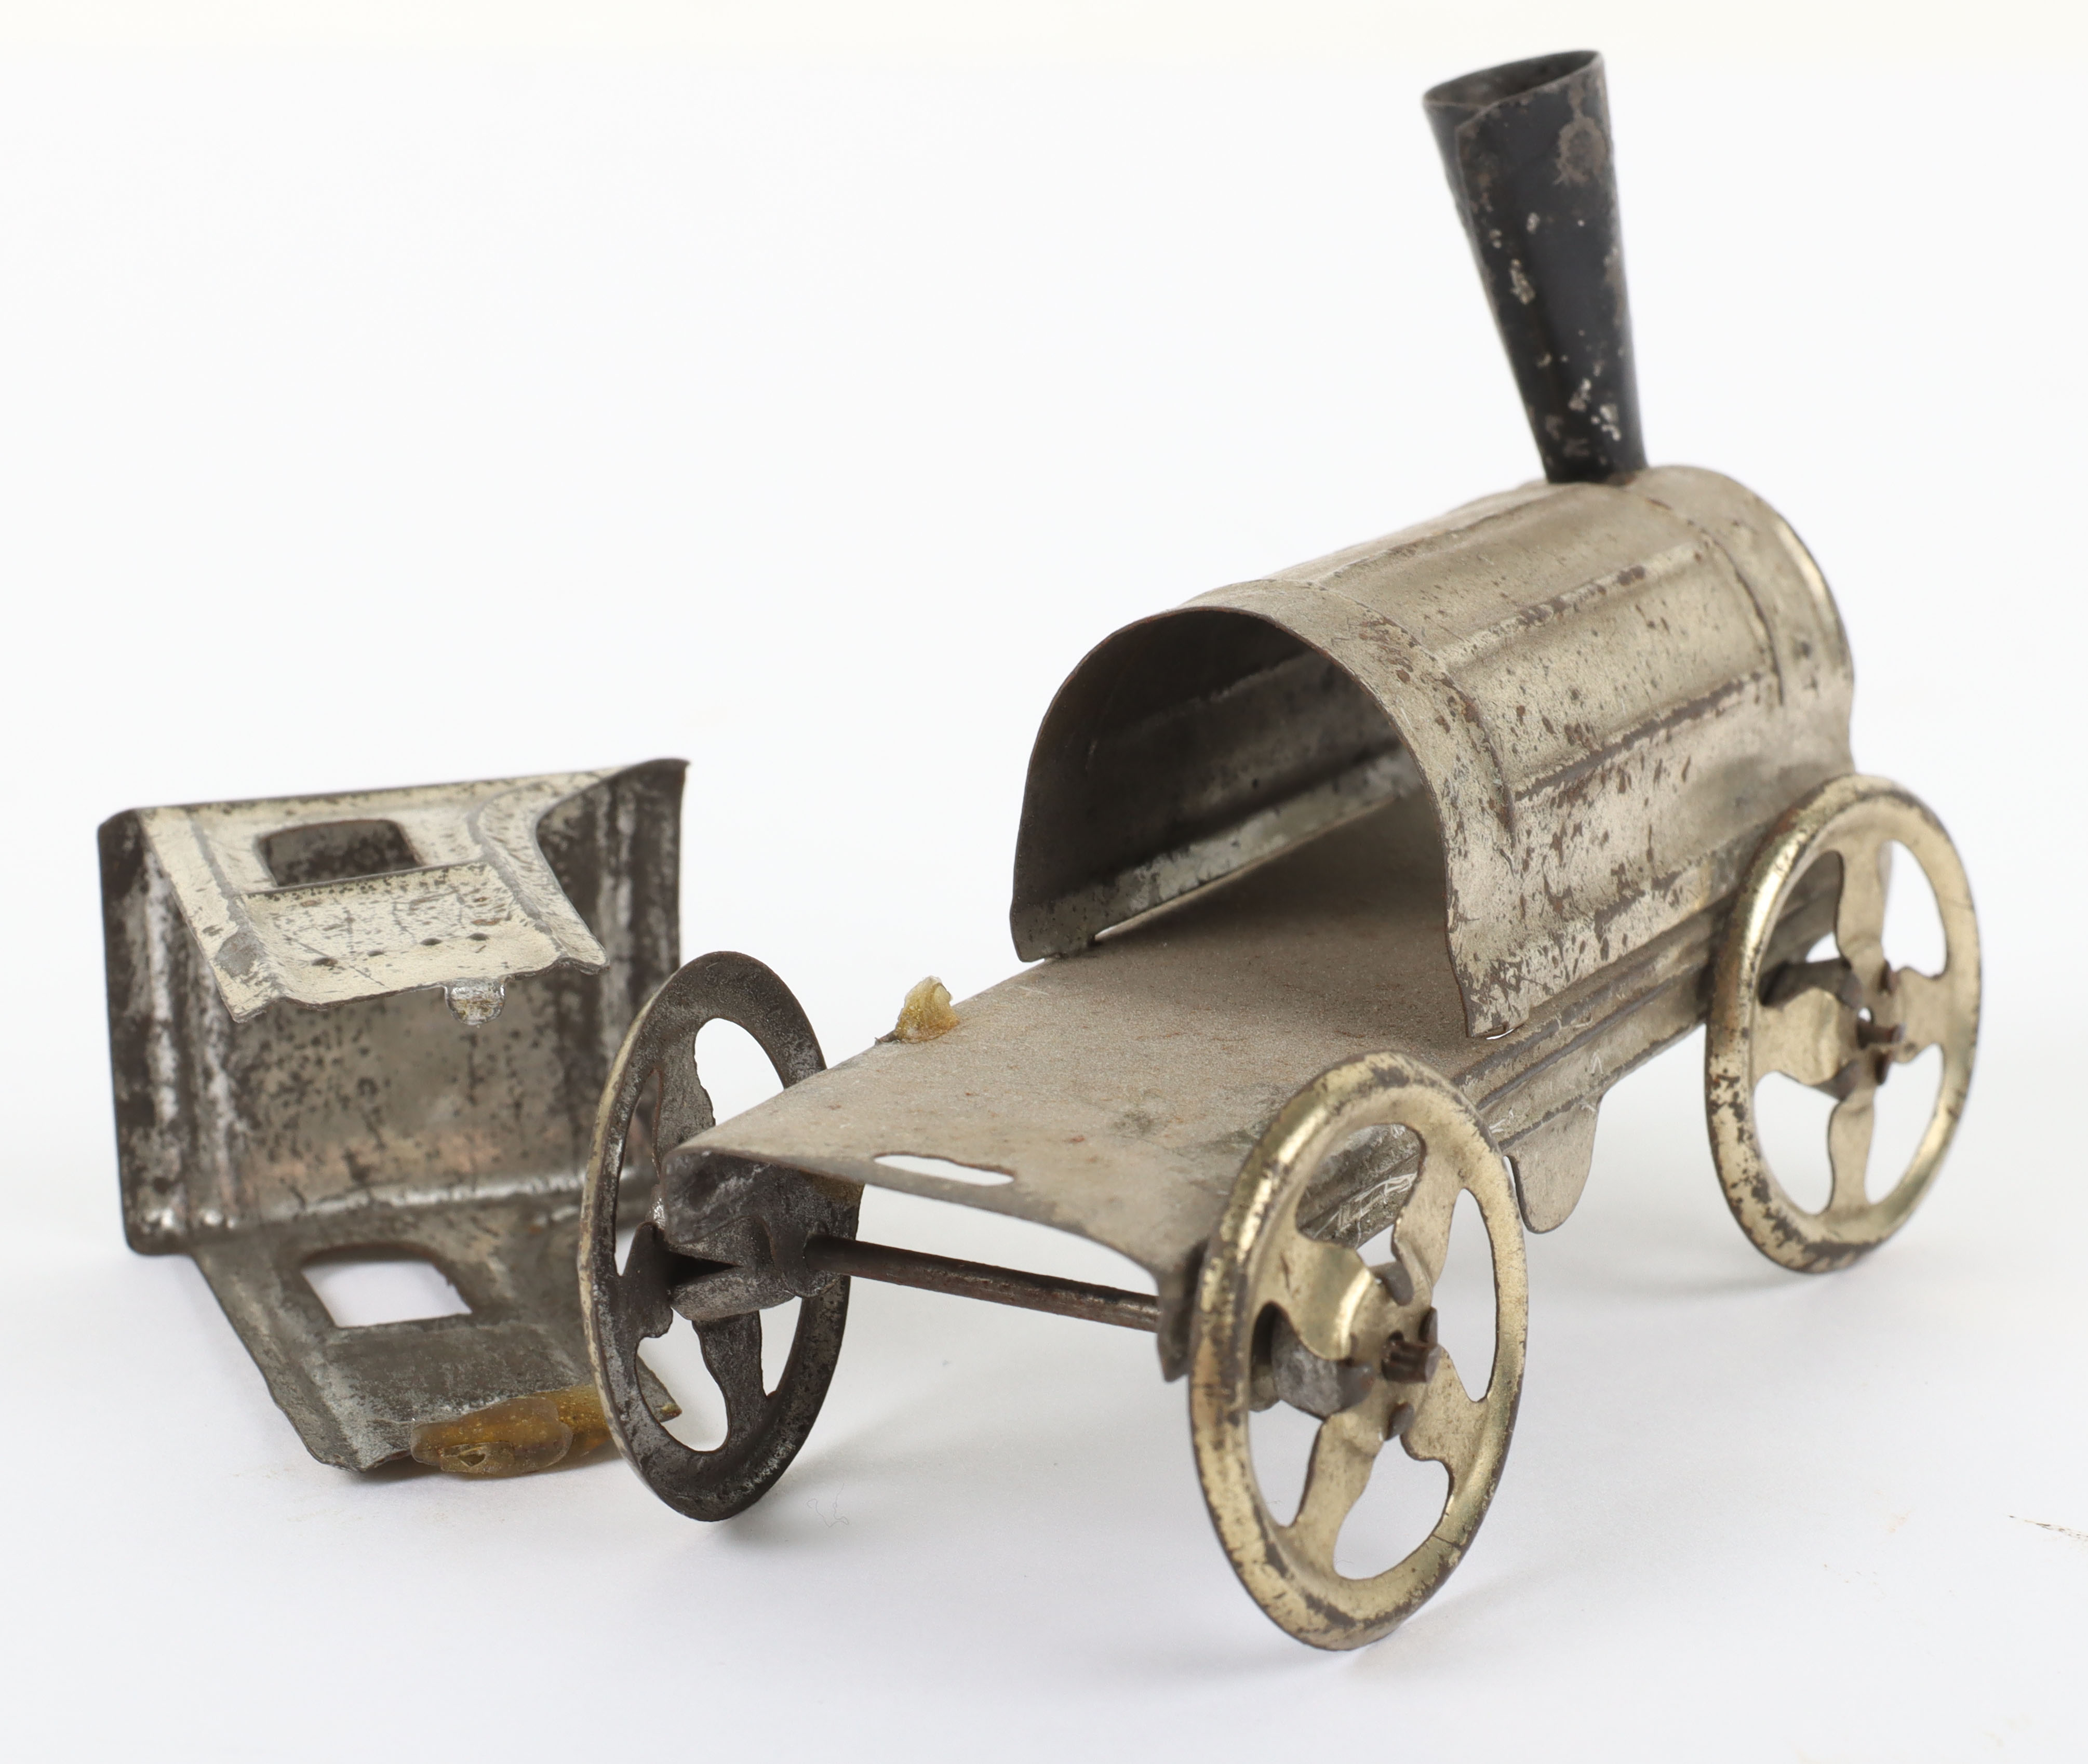 Early Meier pressed tinplate locomotive and carriage penny toy, German circa 1900 - Image 6 of 6